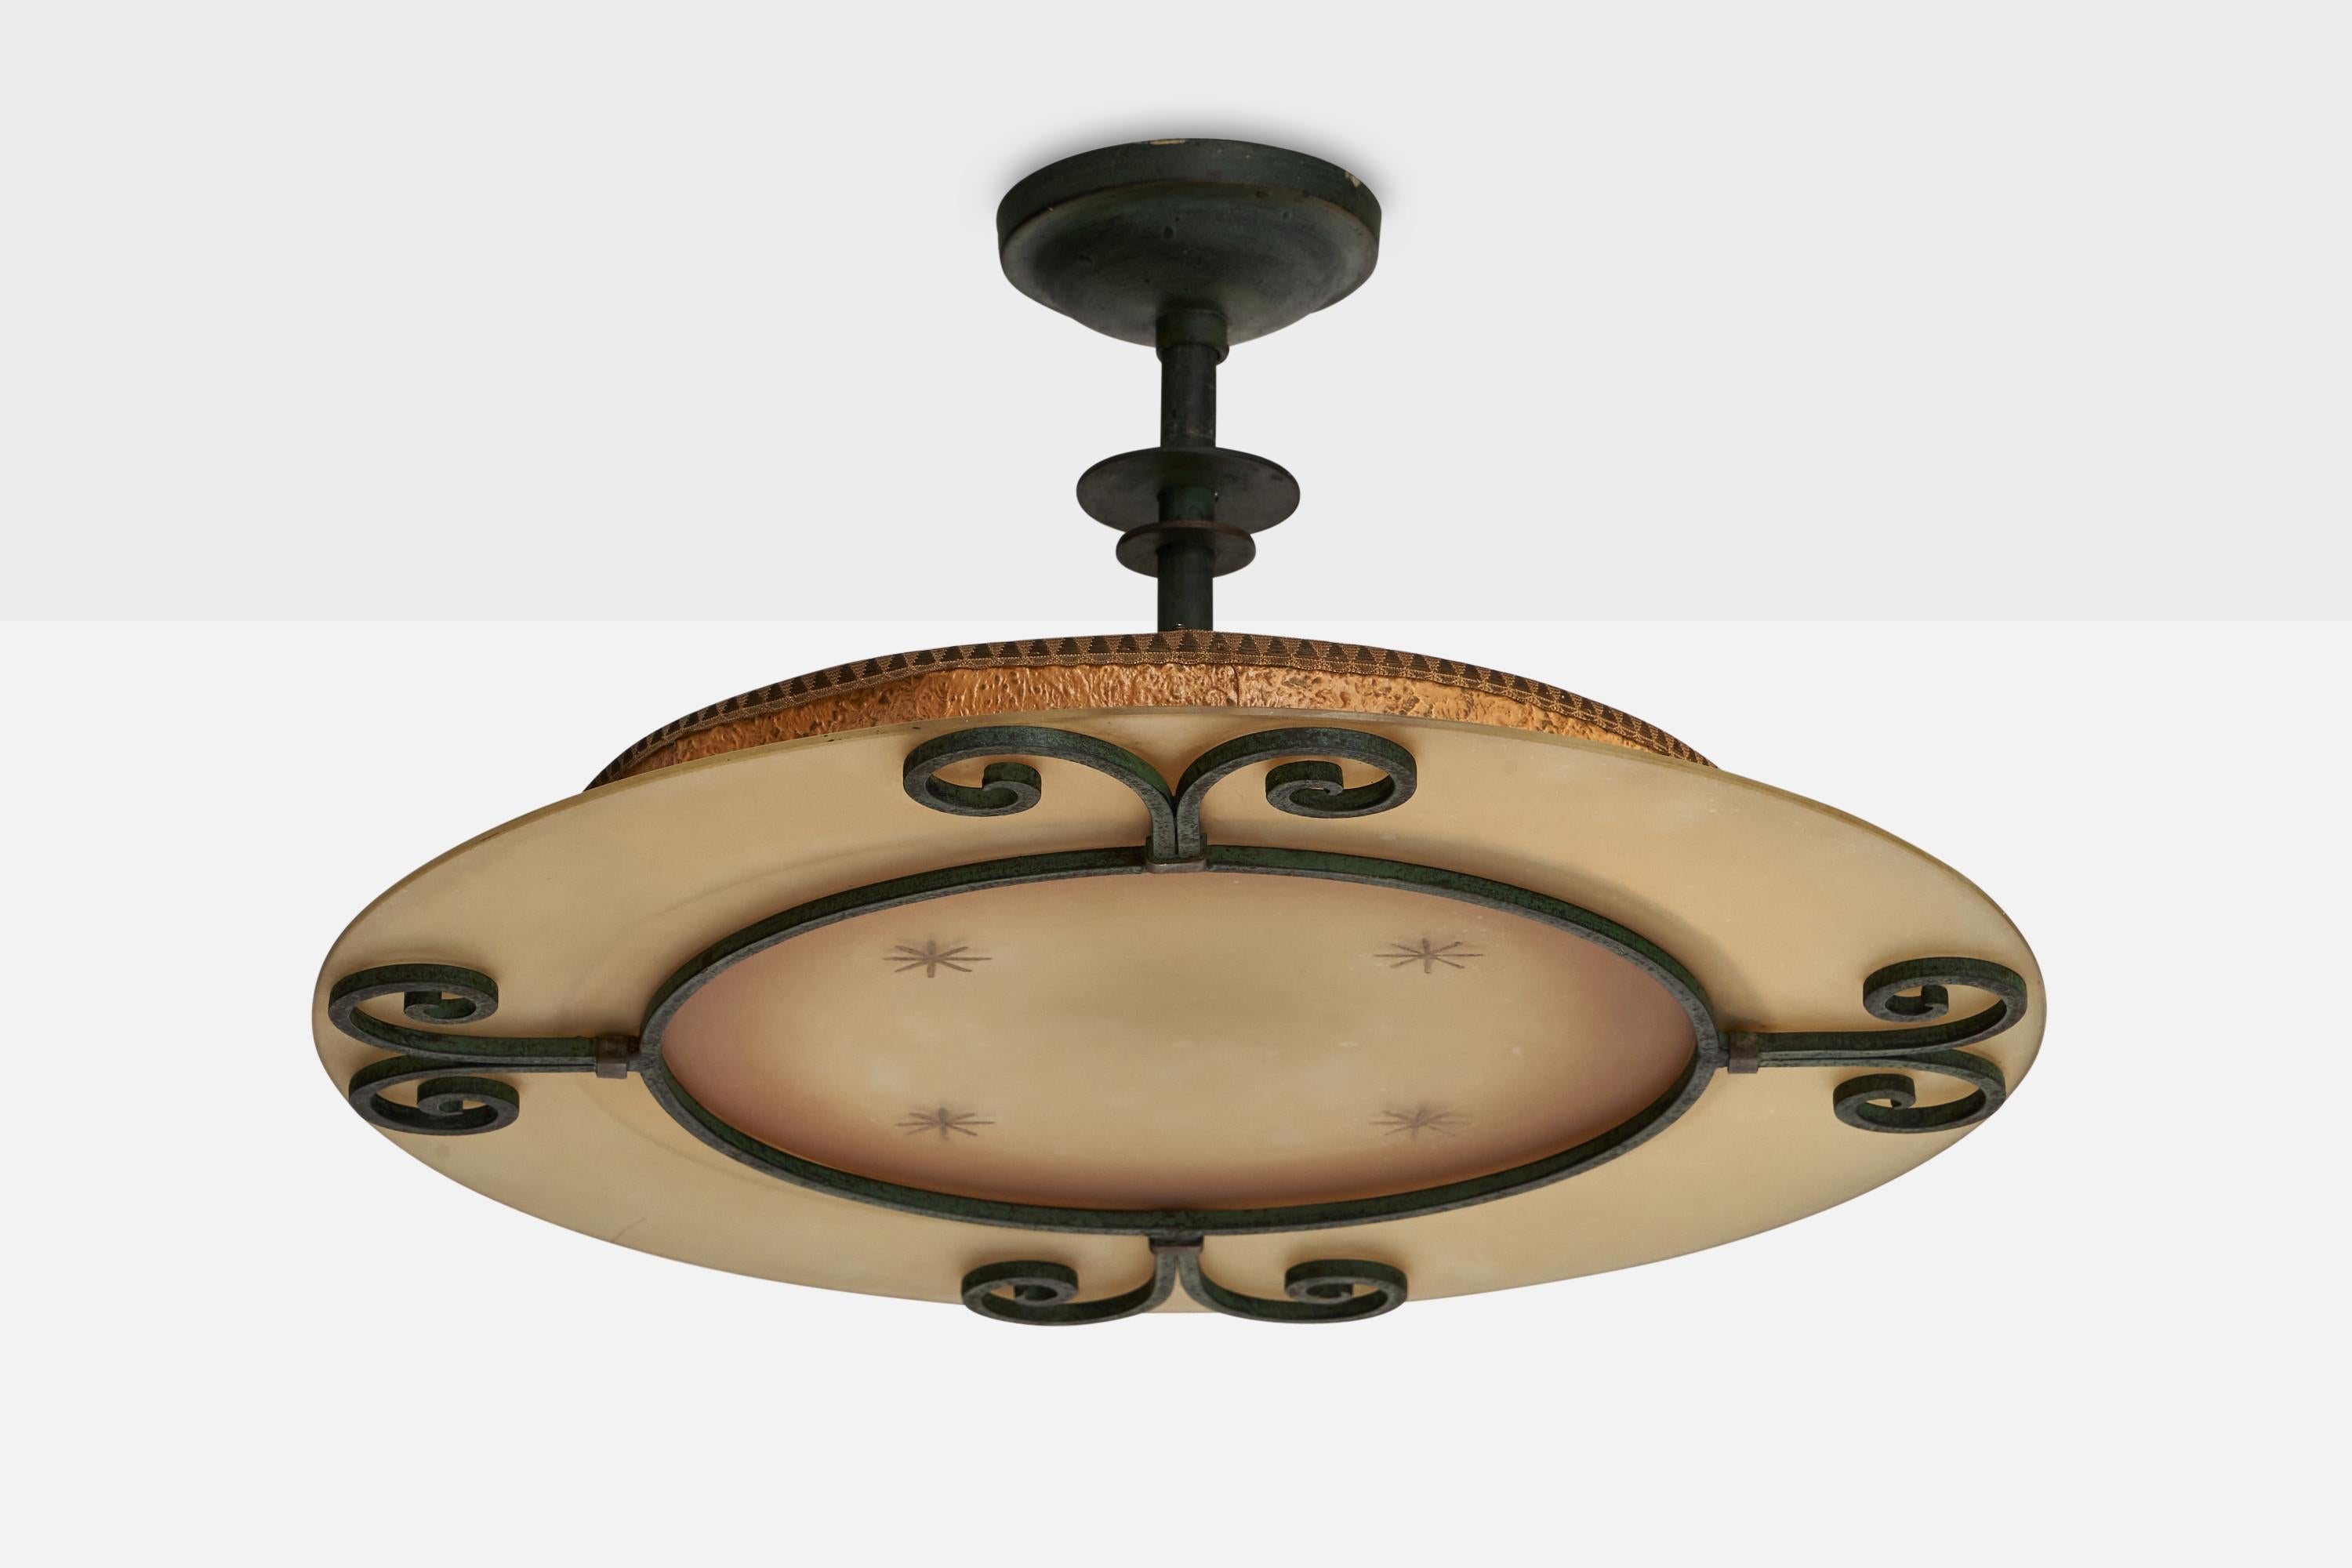 A cast-iron, glass and parchment paper pendant light designed and produced in Sweden, 1930s.

Dimensions of canopy (inches): 2.1” H x 5.45” Diameter
Socket takes standard E-26 bulbs. 4 sockets.There is no maximum wattage stated on the fixture. All